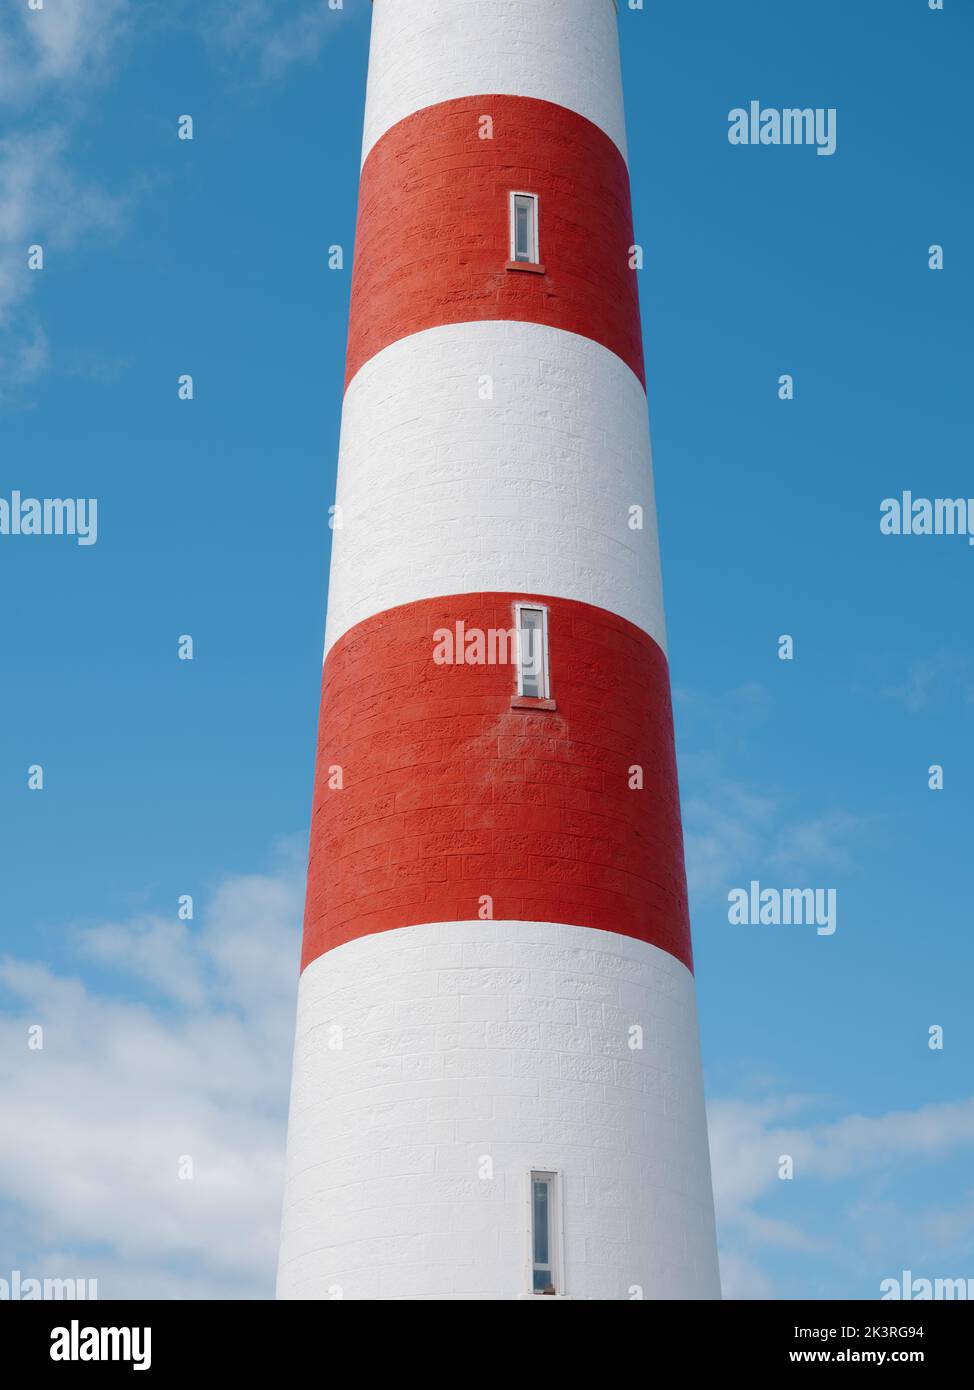 detail of the red and white striped Tower Tarbat Ness Lighthouse, Tarbat Ness, Tain & Easter Ross, Cromartyshire, Scotland UK Stock Photo